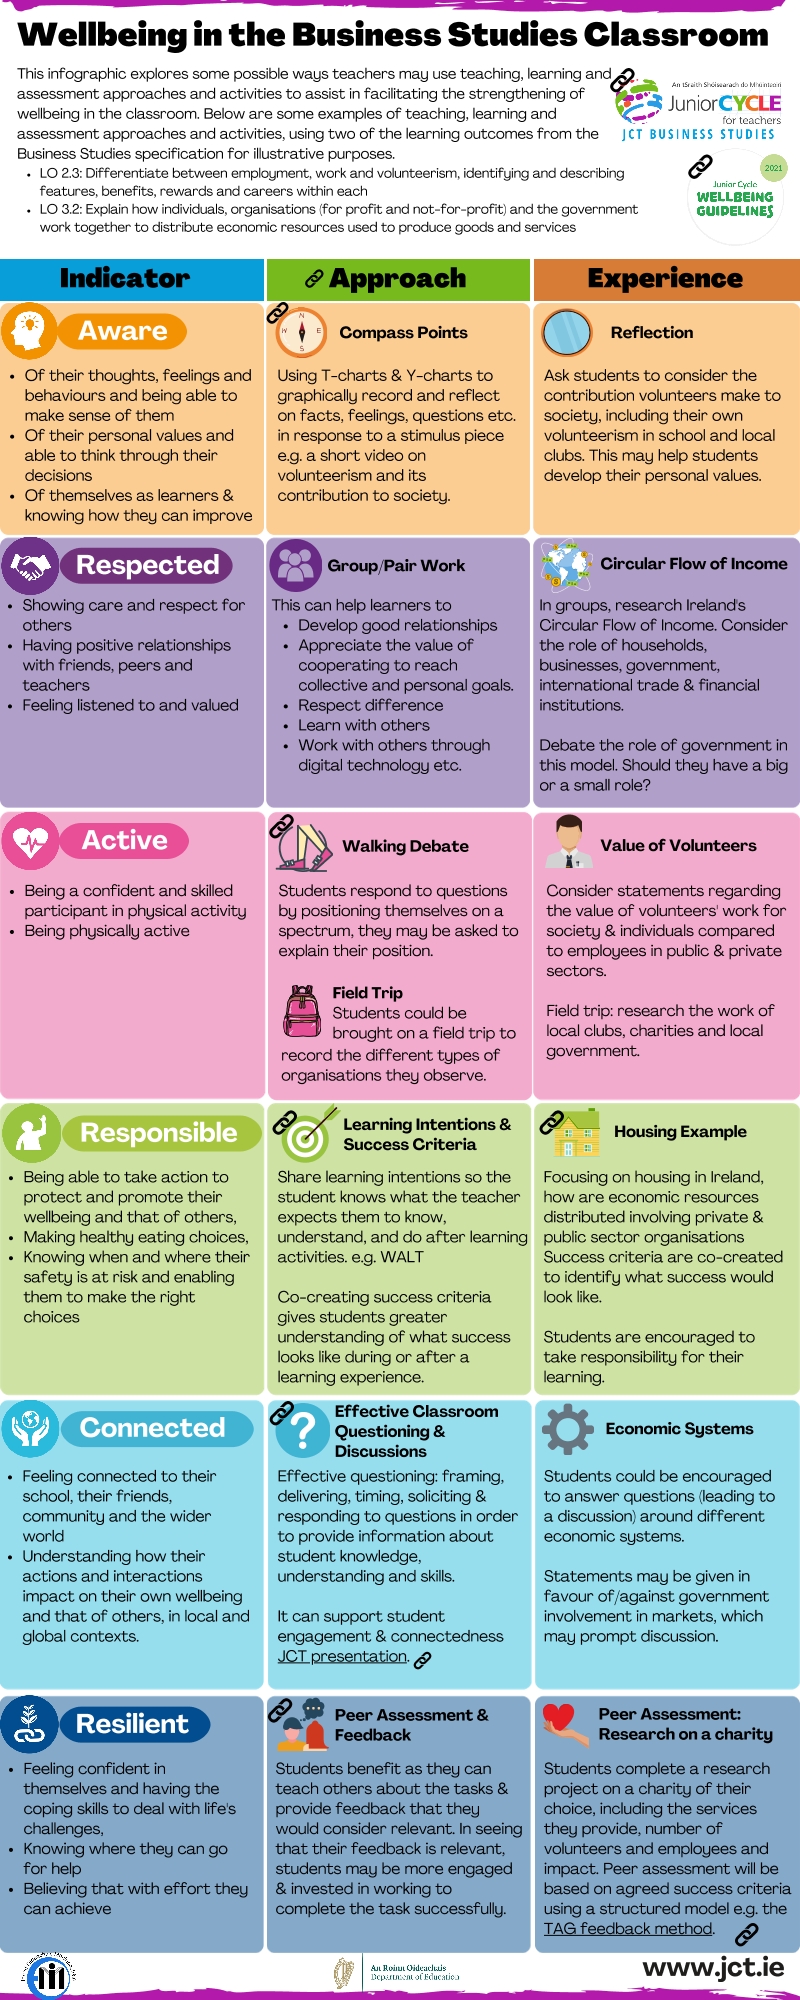 Business Studies Student Wellbeing Infographic